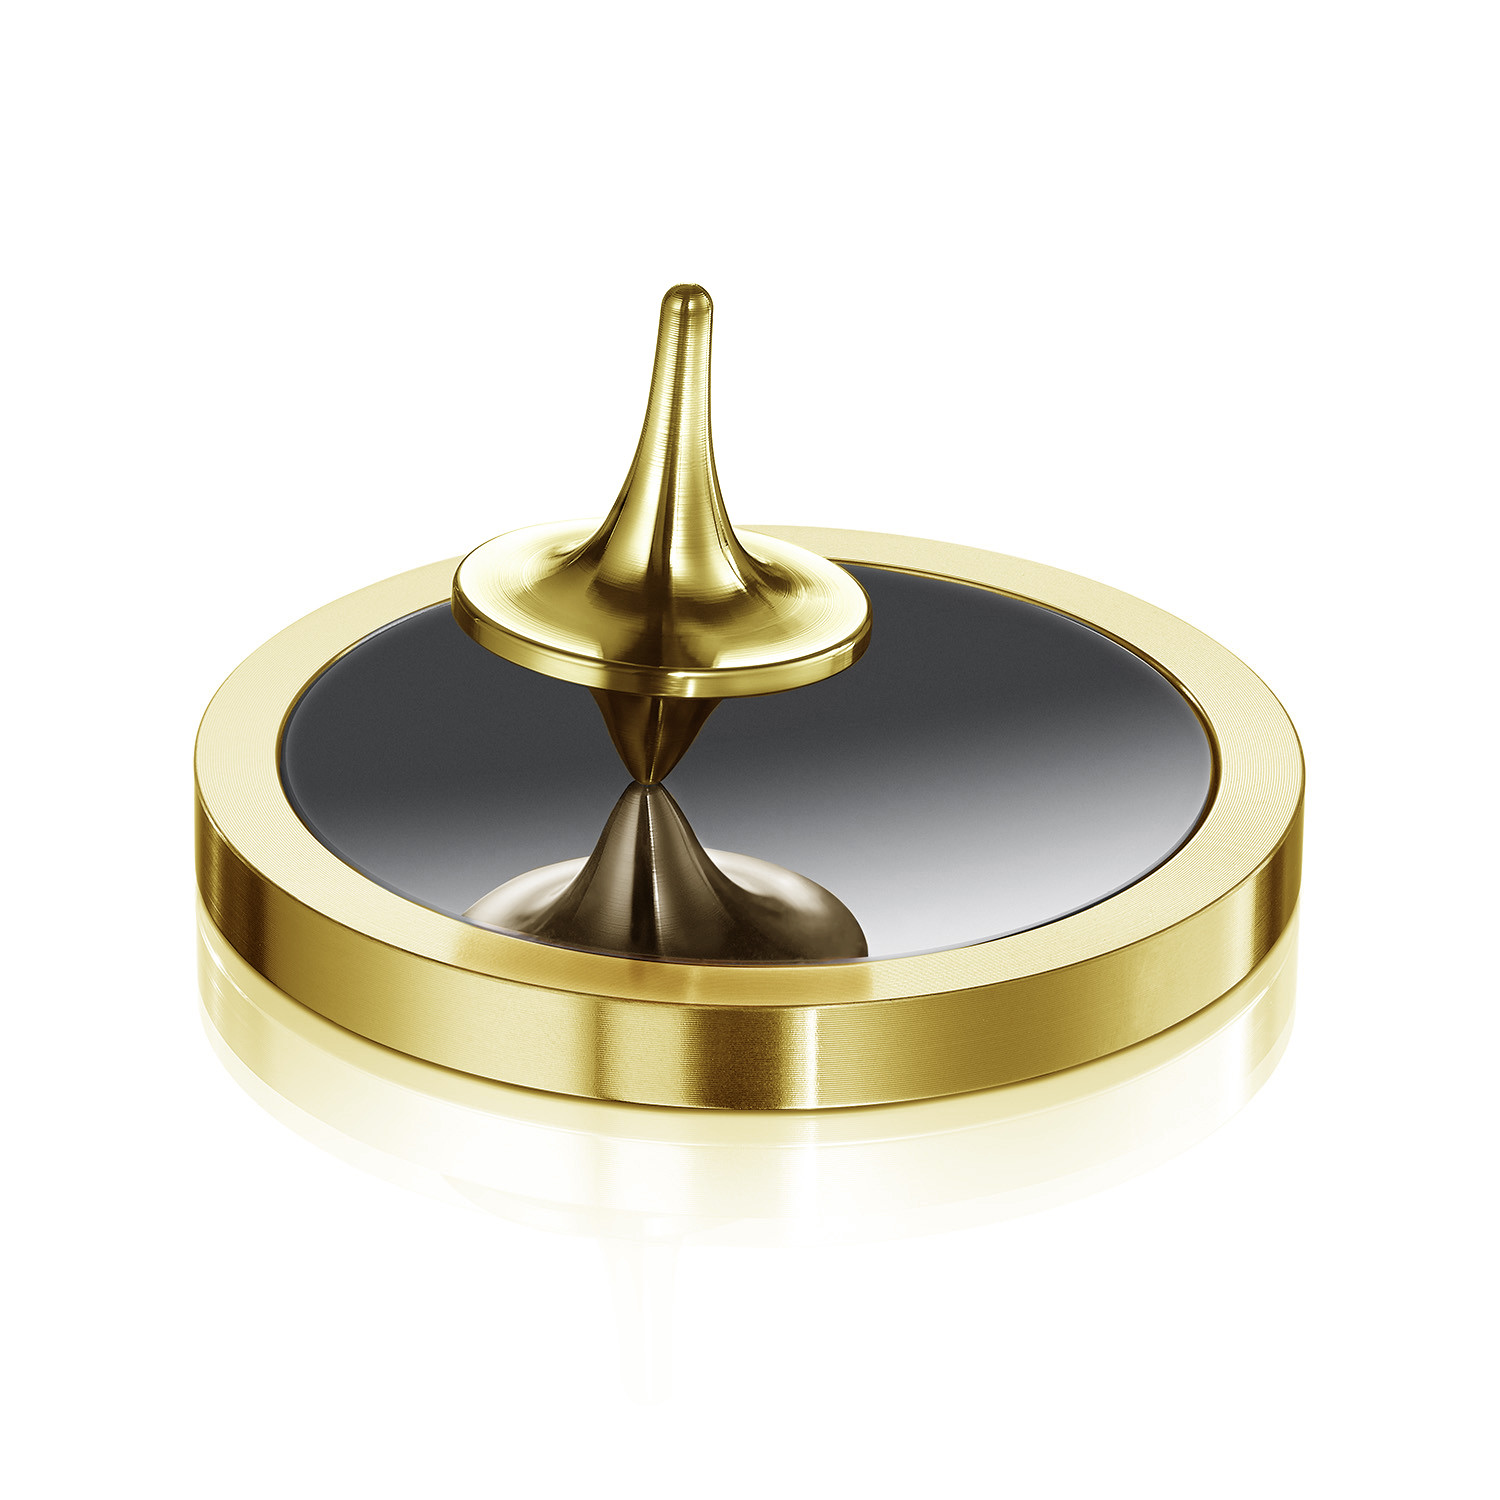 ForeverSpin 24kt Plated Gold Dock World Famous Spinning Tops